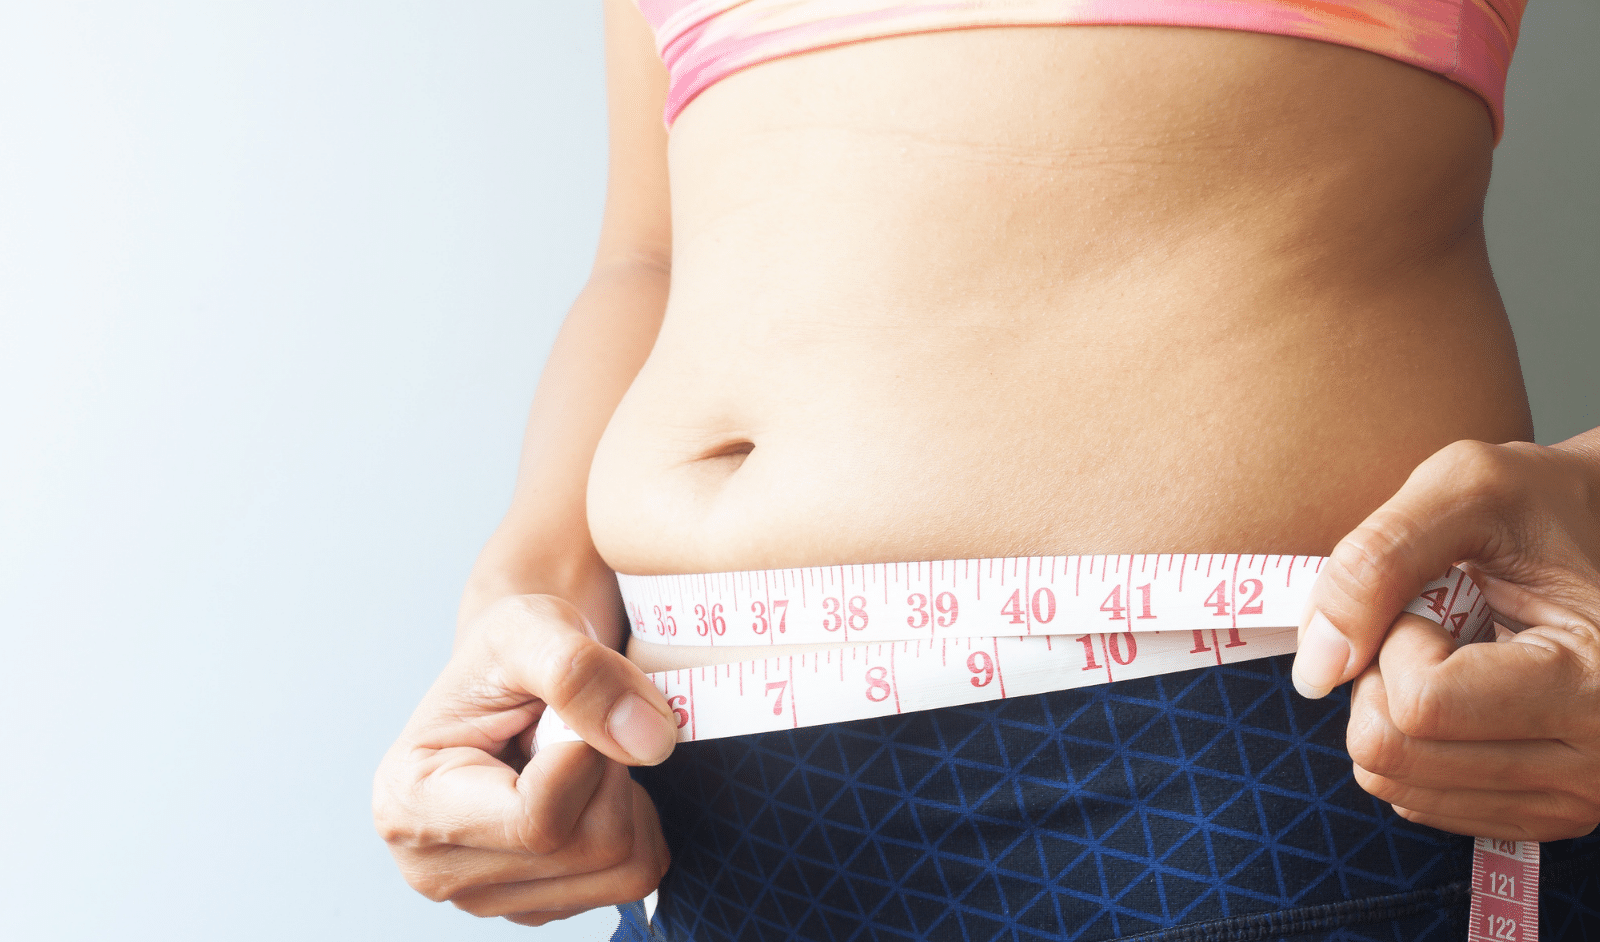 6 Scientific Ways to Lose Weight and Reset Your Body